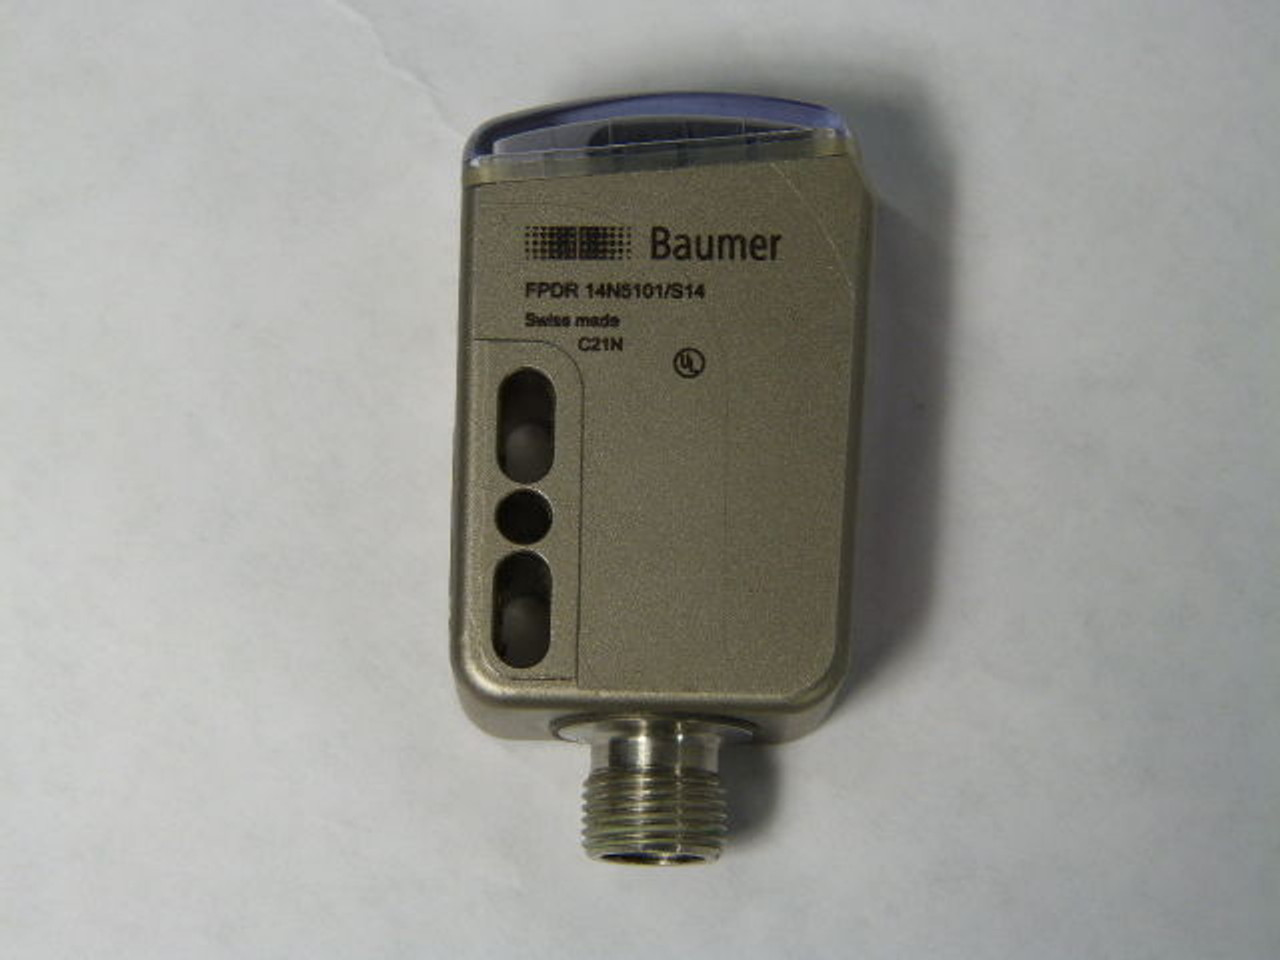 Baumer FPDR-14N5101/S14 Retro-Reflective Photoelectric Sensor 4Pin M12 USED